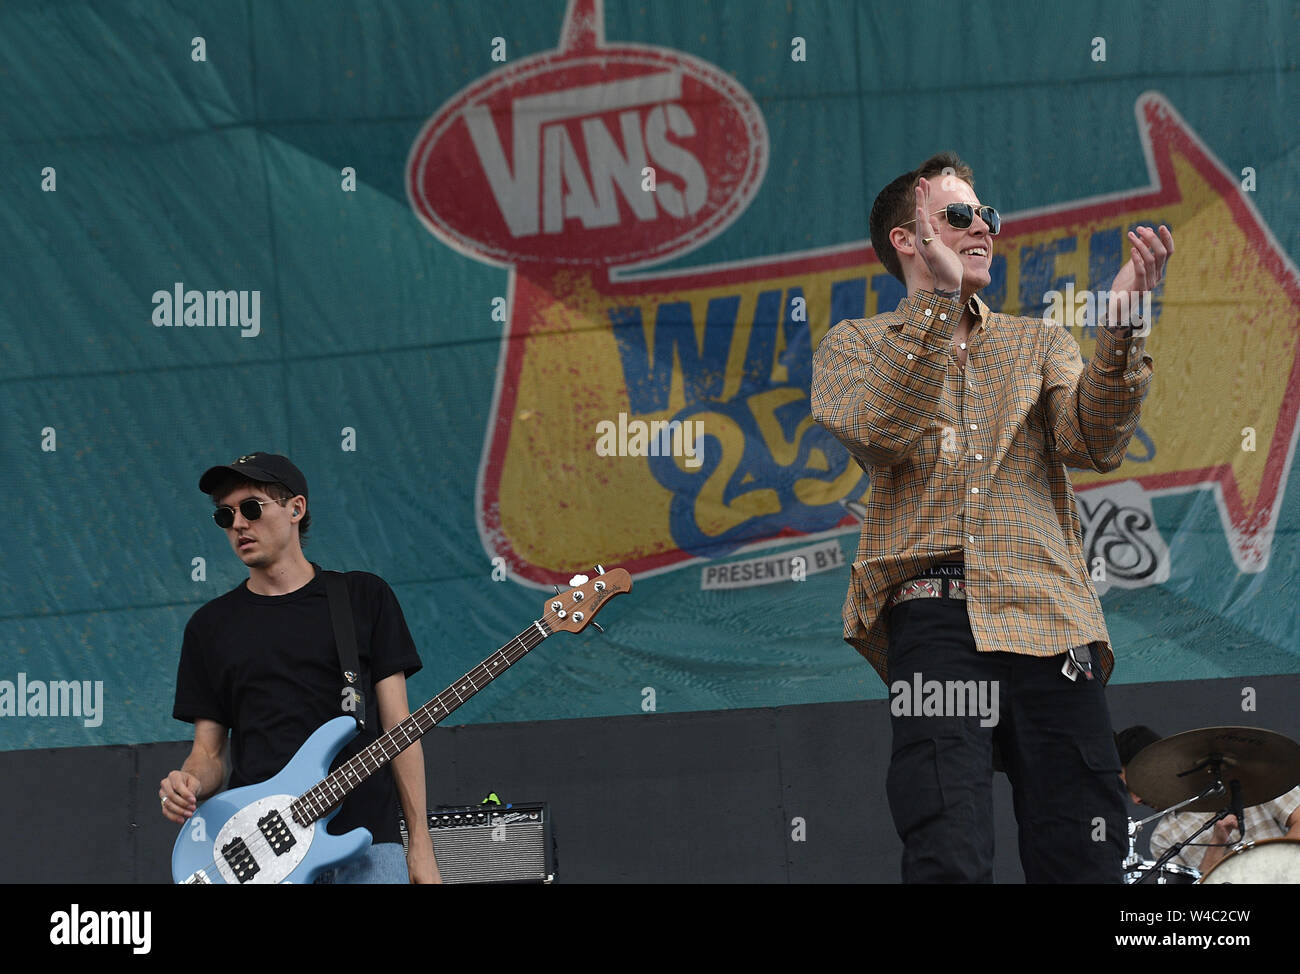 California, USA. 21st July, 2019. The Story So Far performs during the Vans  Warped Tour 25th Anniversary on July 21, 2019 in Mountain View, California.  Credit: MediaPunch Inc/Alamy Live News Stock Photo - Alamy